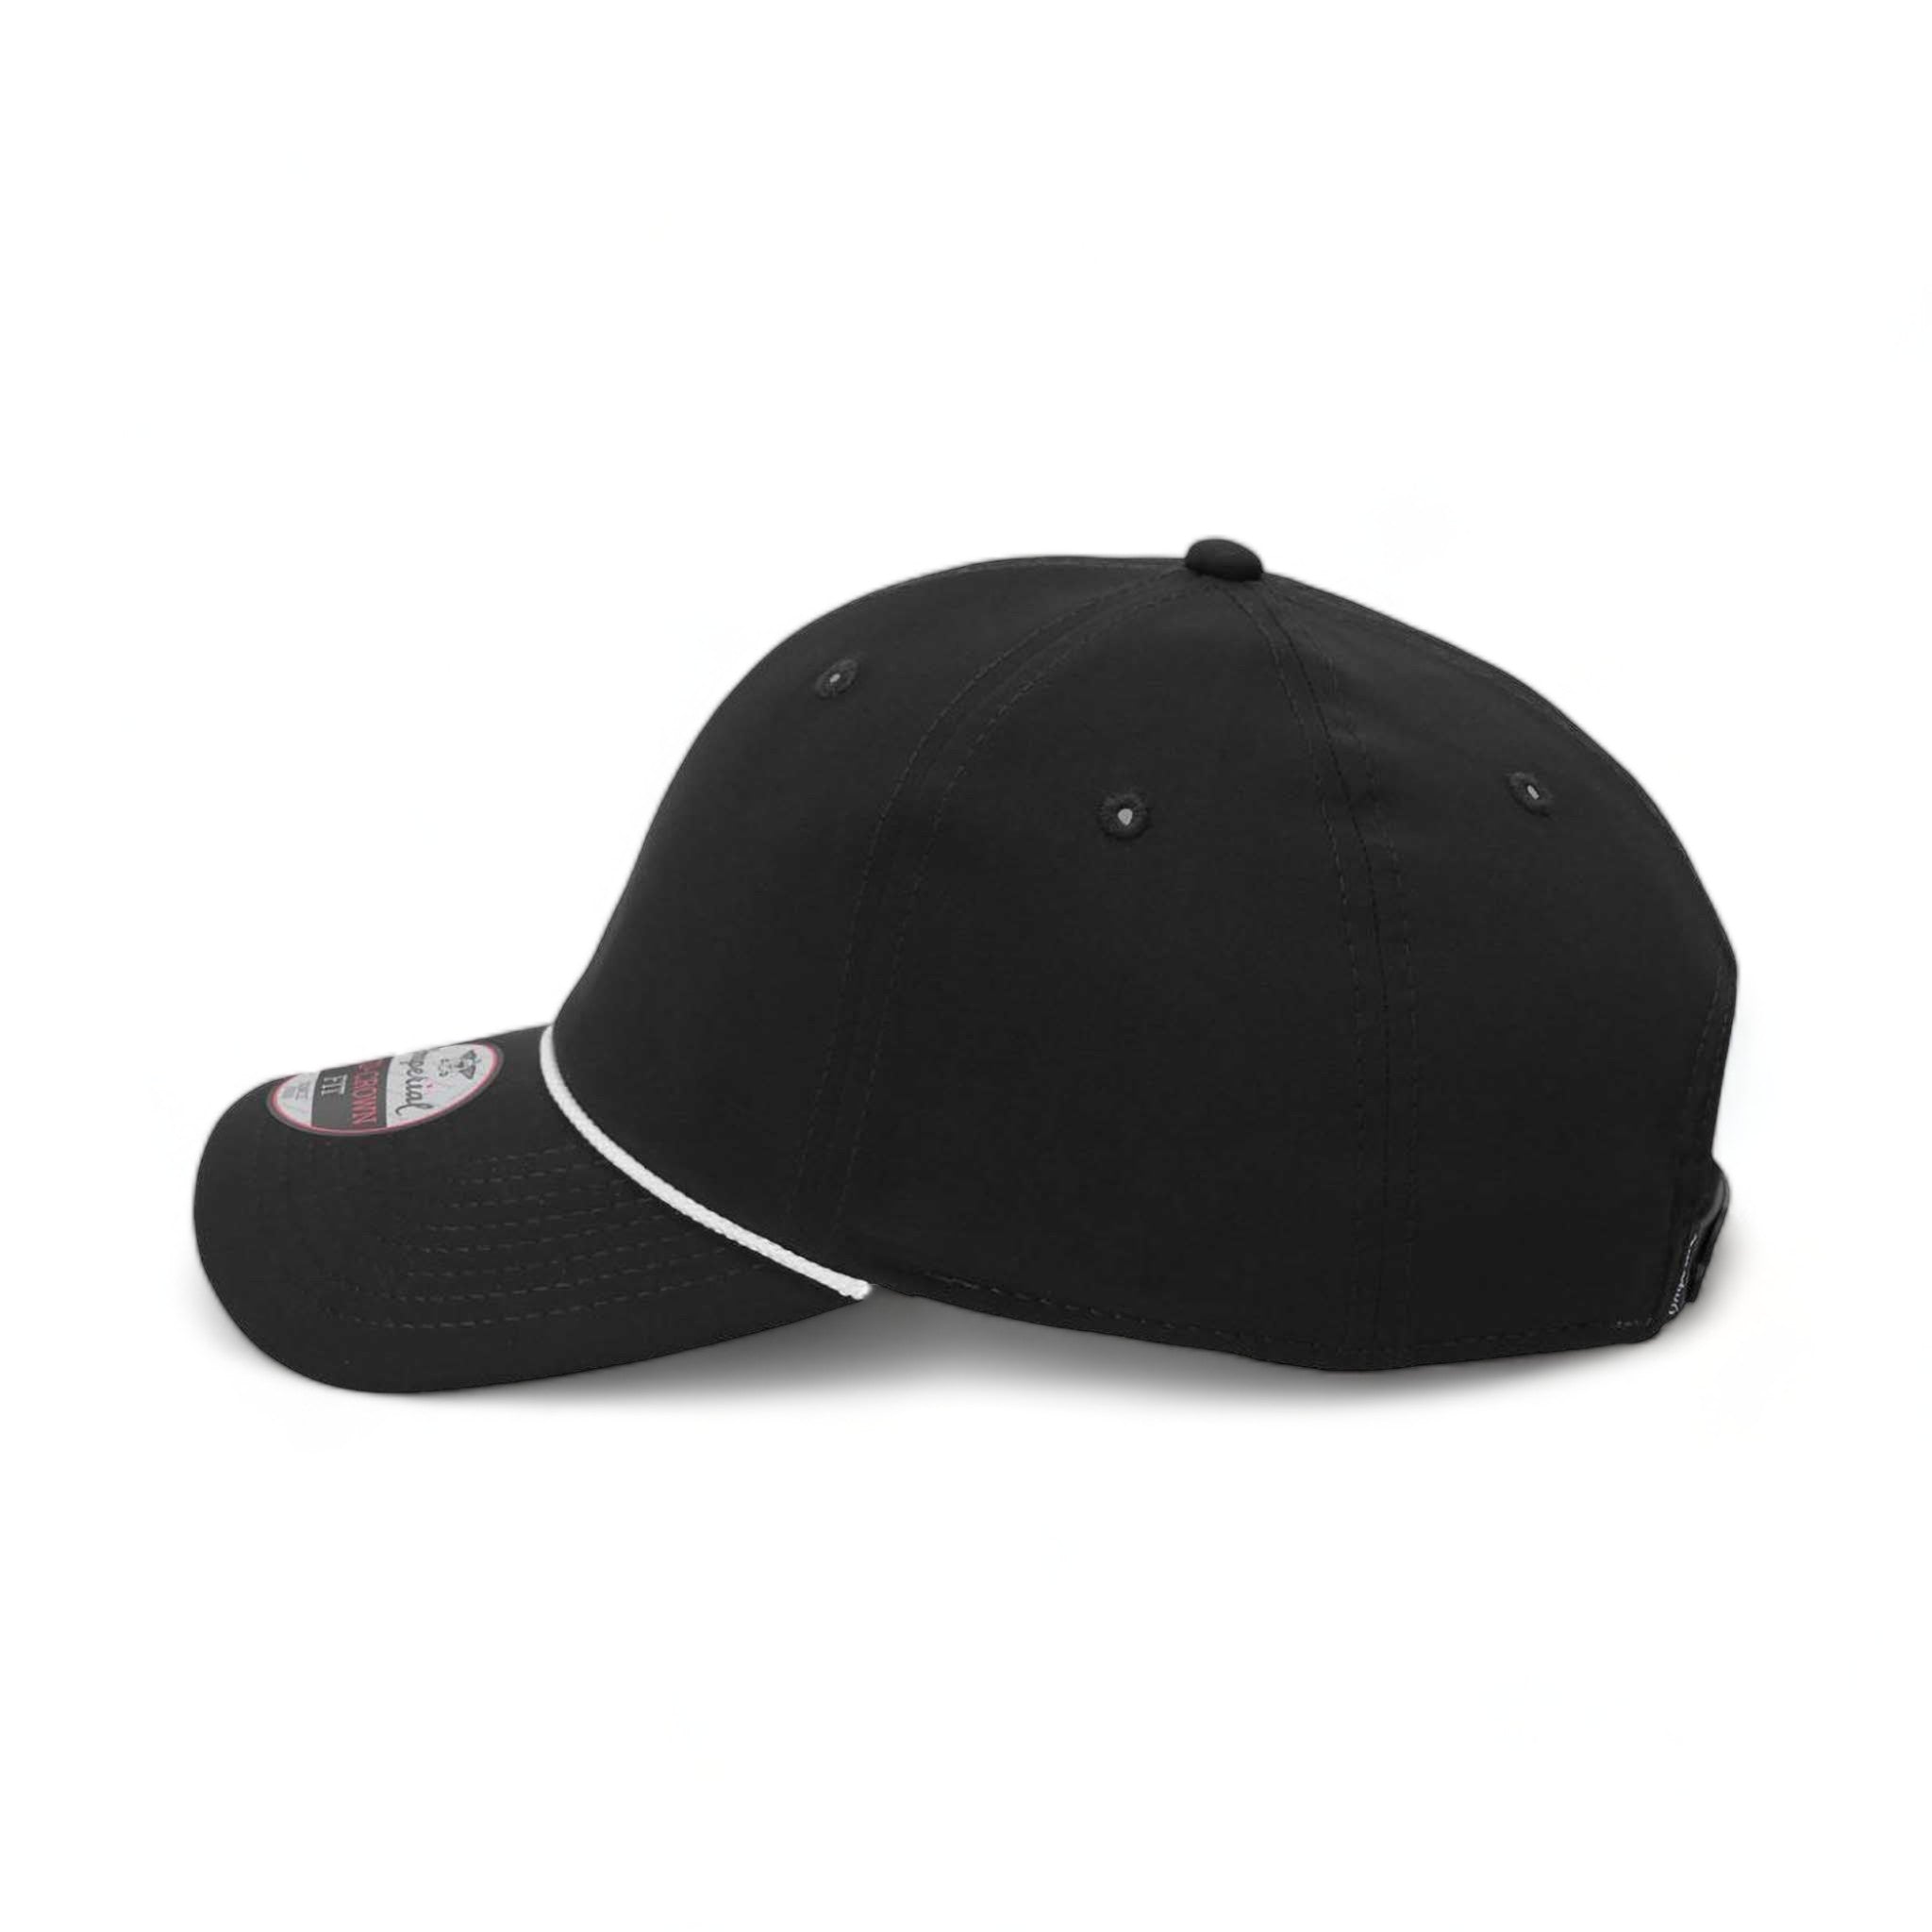 Side view of Imperial 7054 custom hat in black and white